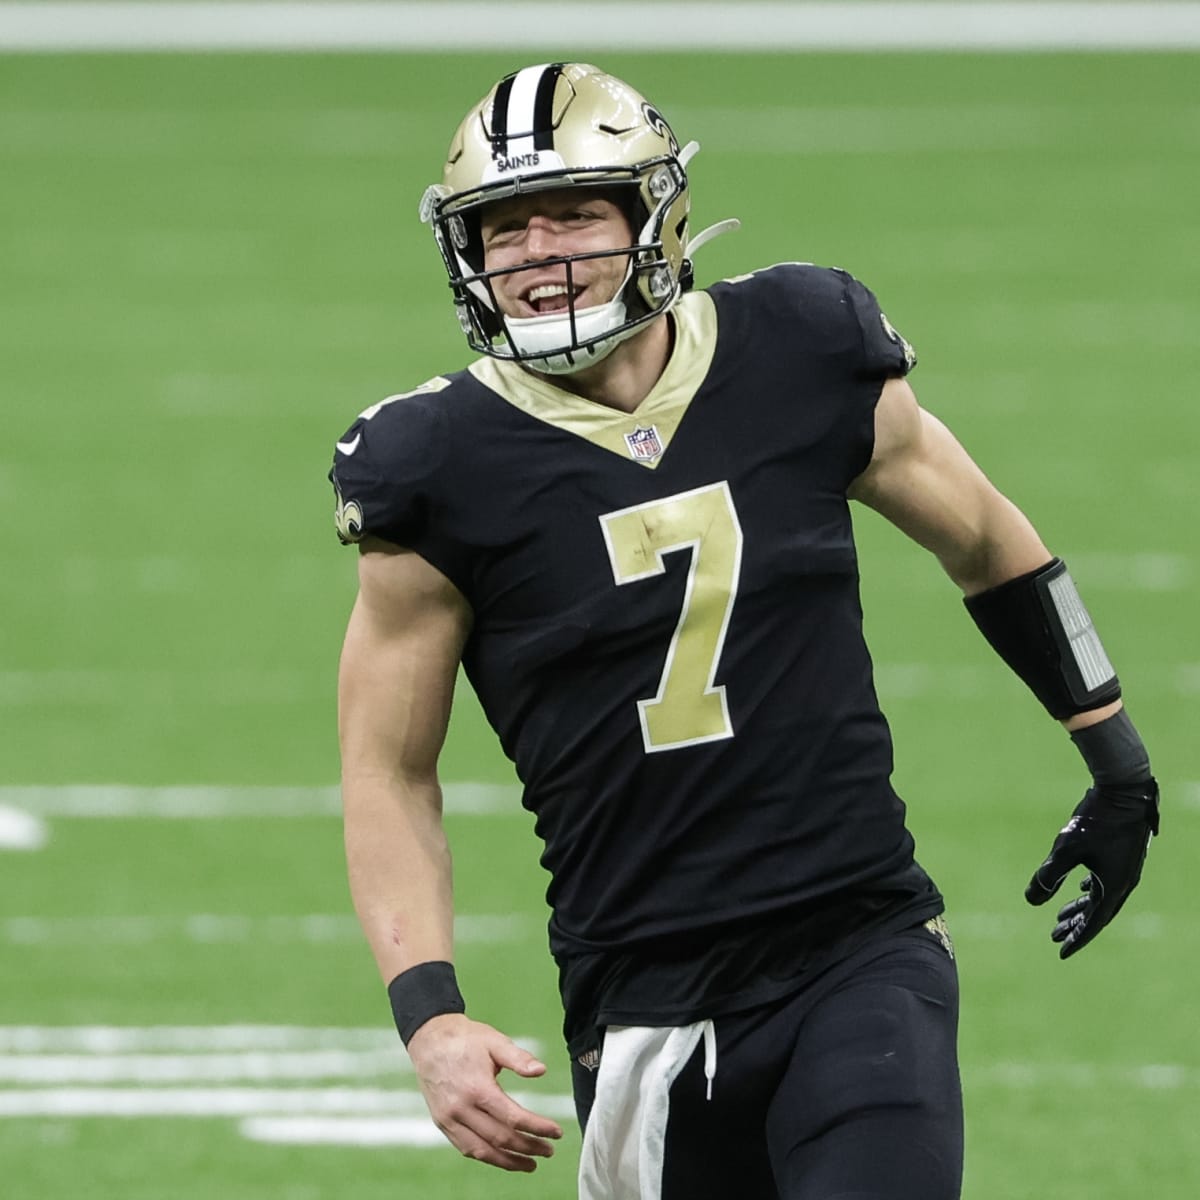 Taysom Hill flourishing as versatile weapon for the Saints